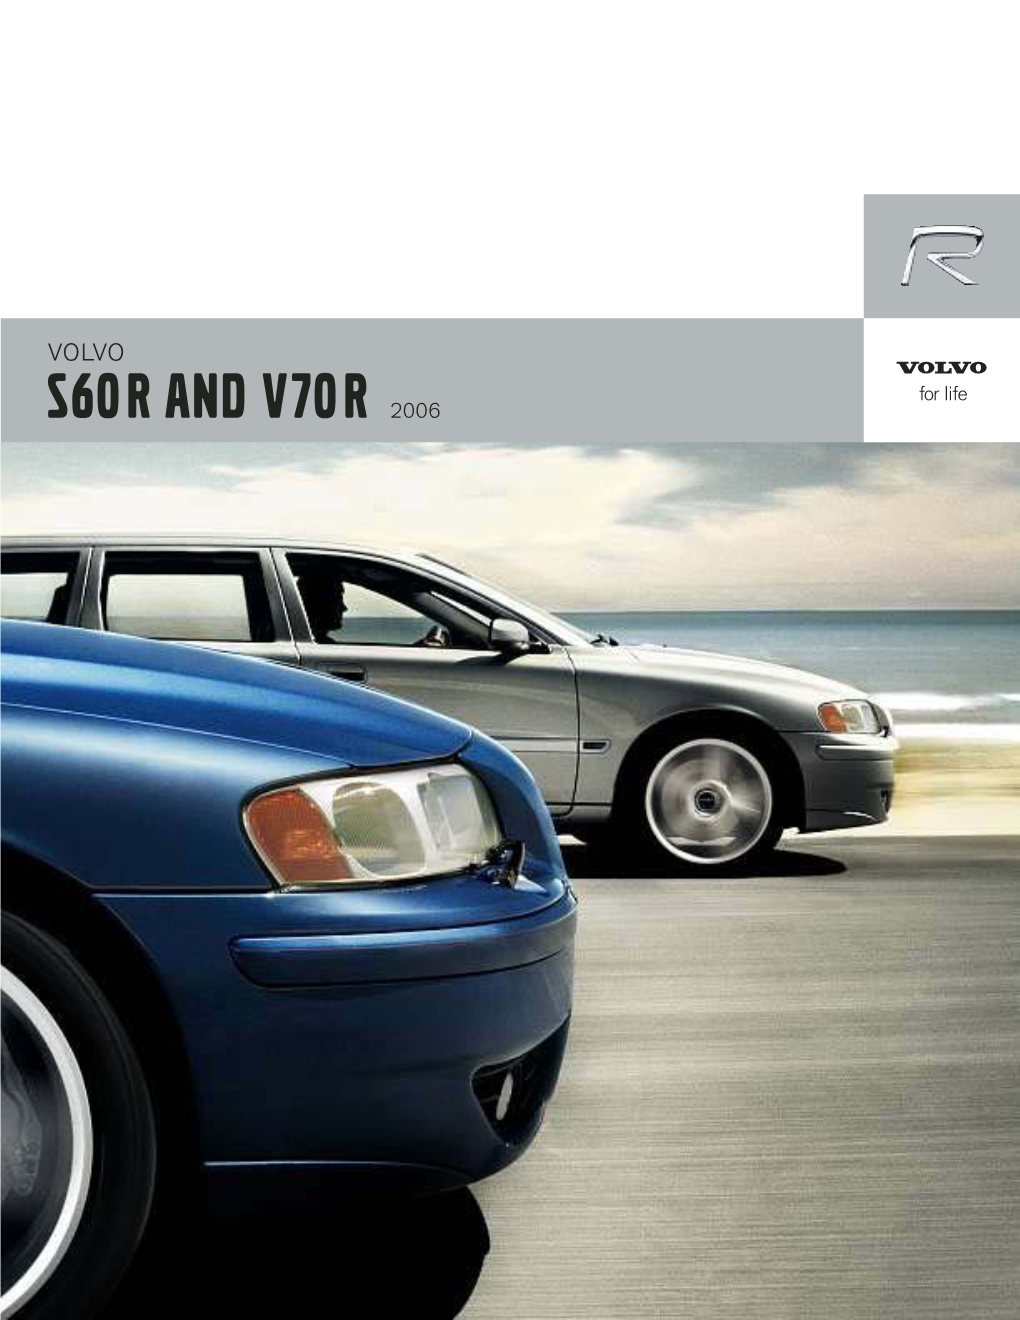 S60r and V70r 2006 “Cars Are Driven by People